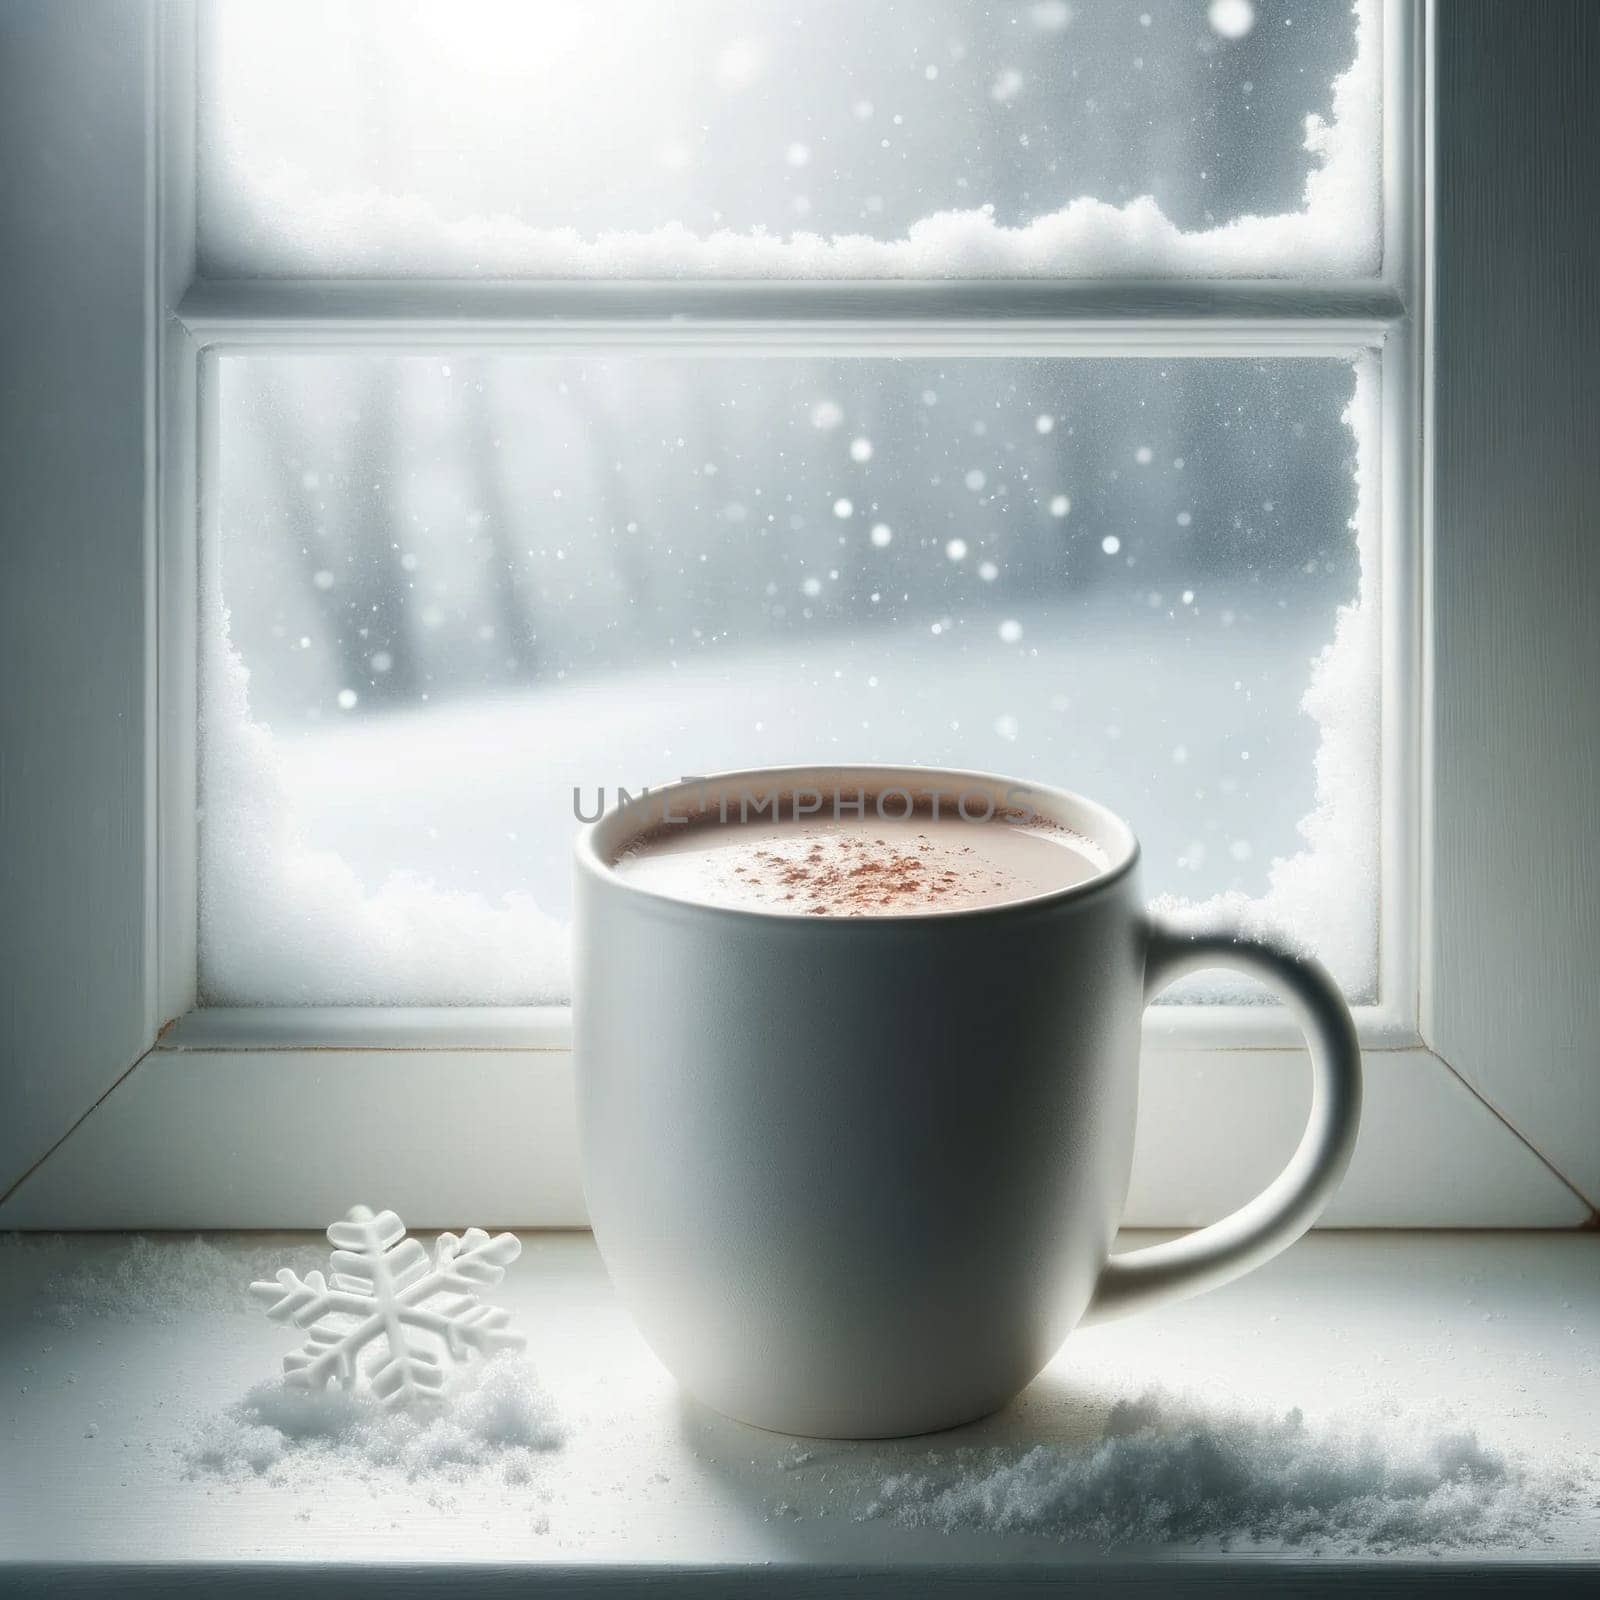 Winter's window with frosty mug. Created using AI Generated technology and image editing software.